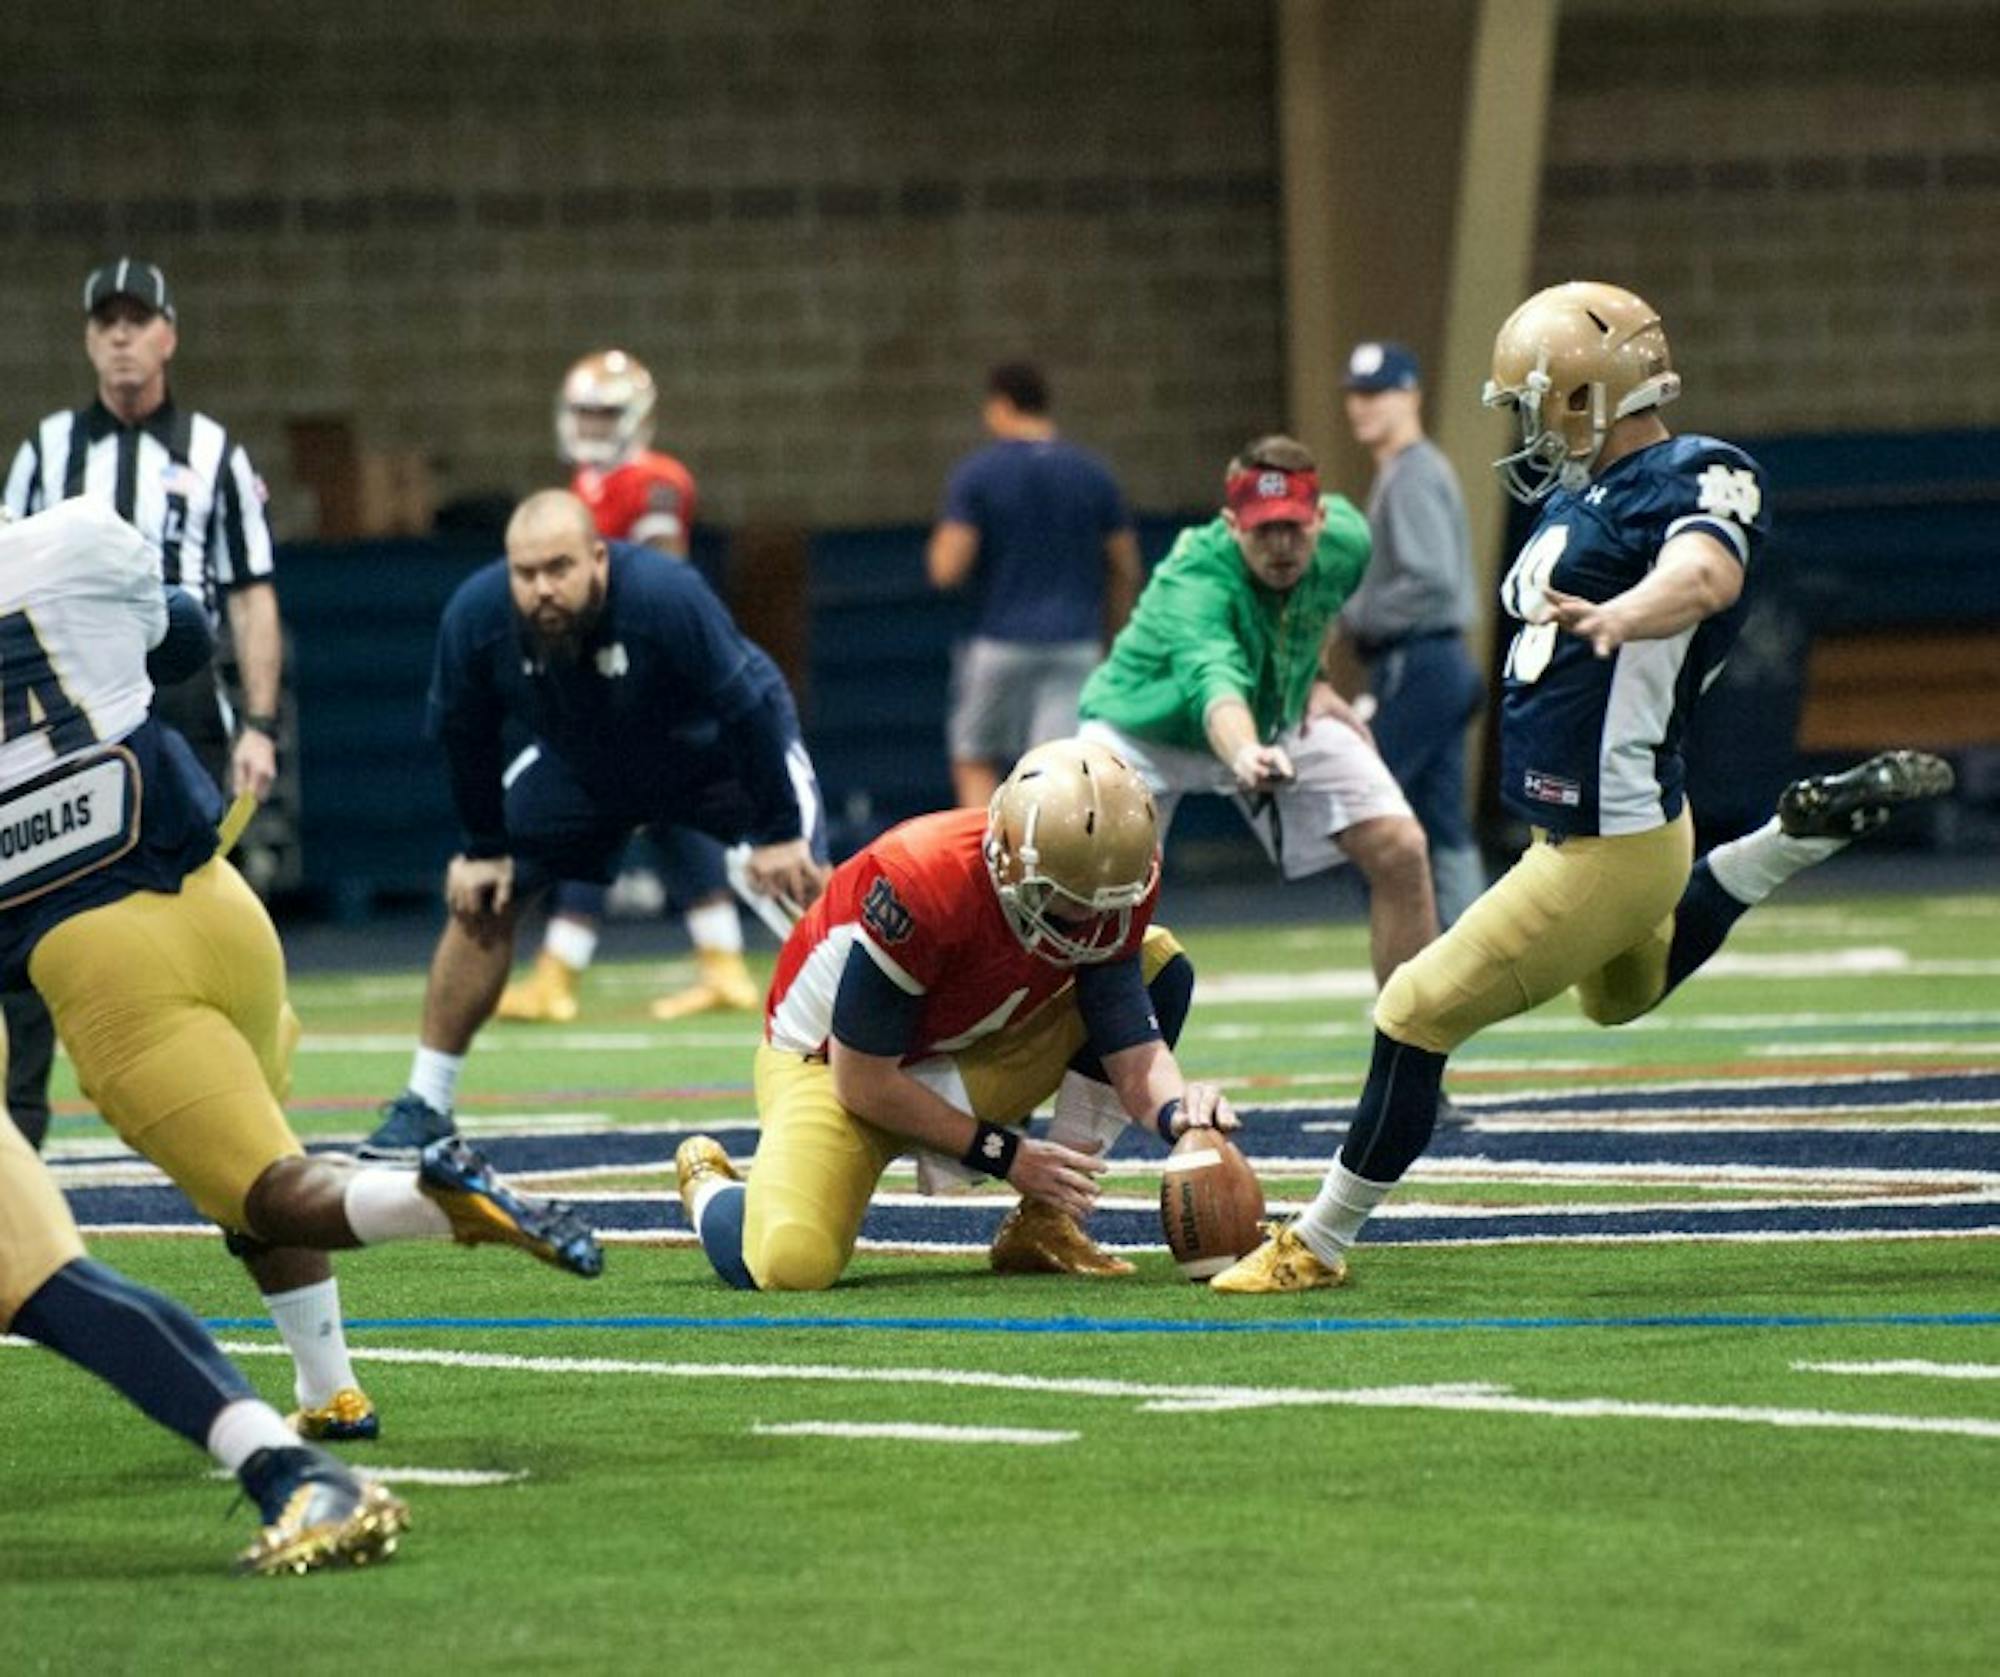 Irish sophomore kicker Justin Yoon attempts a field goal during Notre Dame's spring practice session Saturday at Loftus Sports Center.